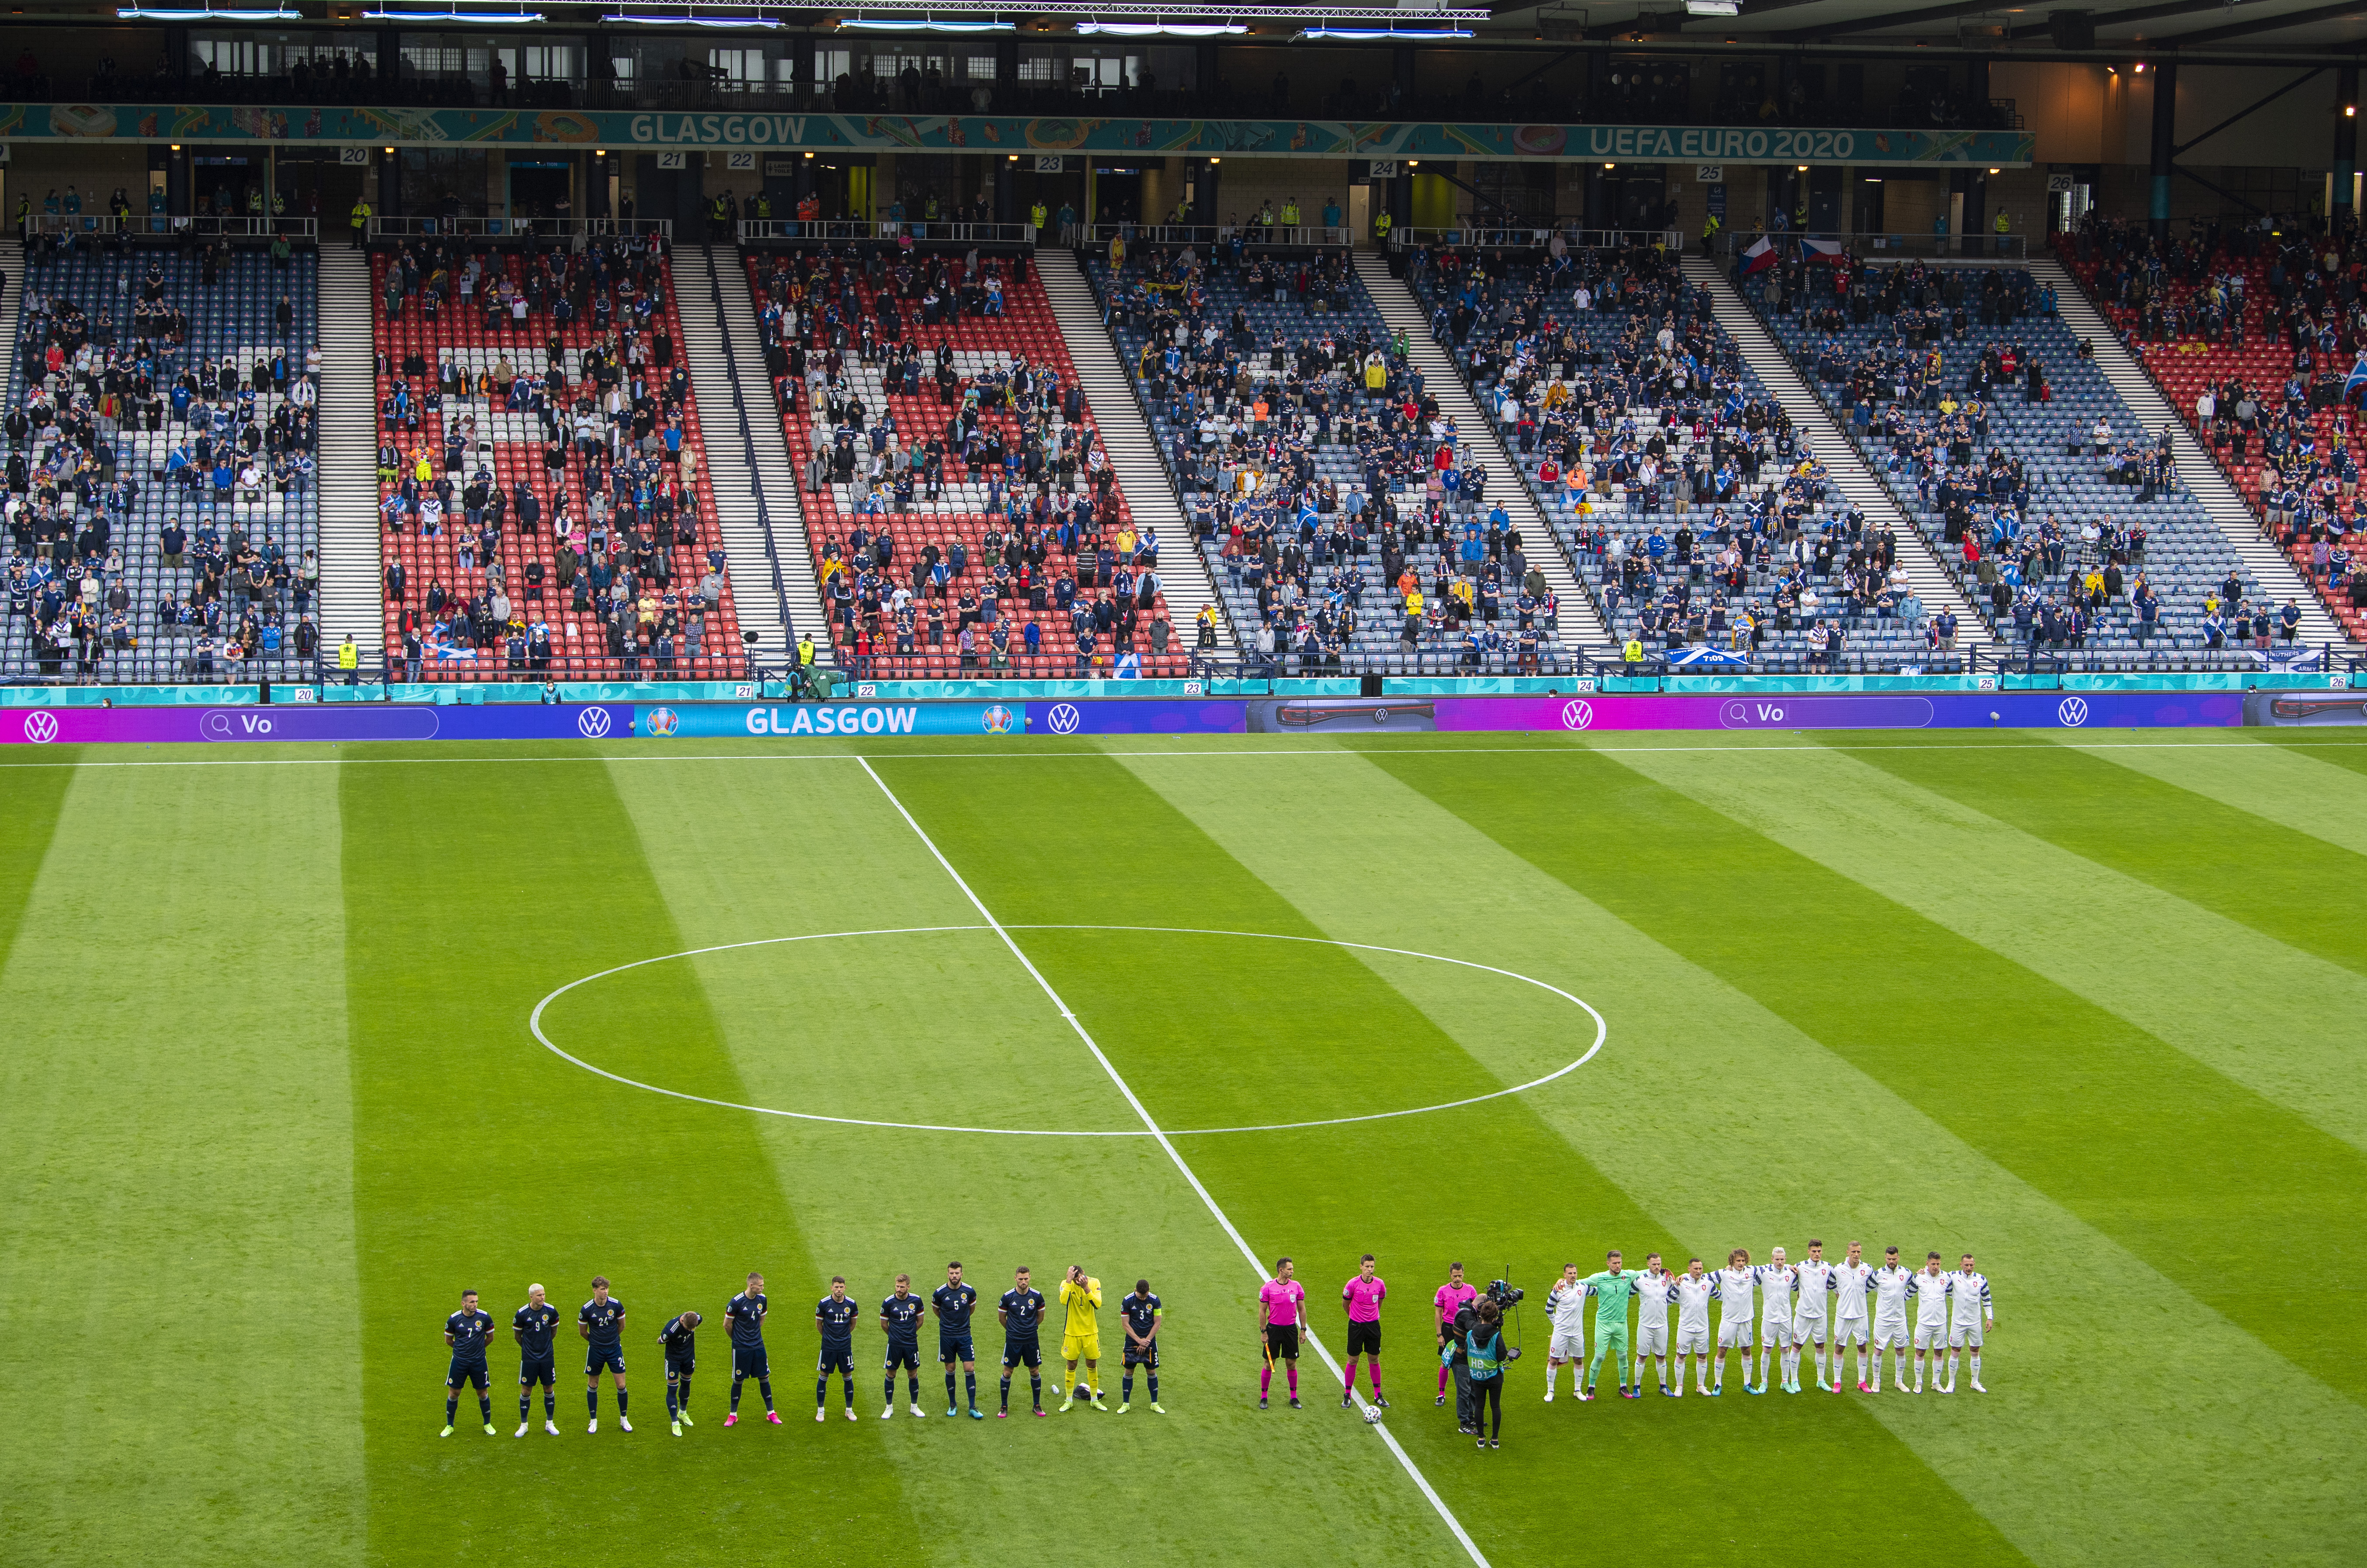 The teams line up for the pre-match national anthems.